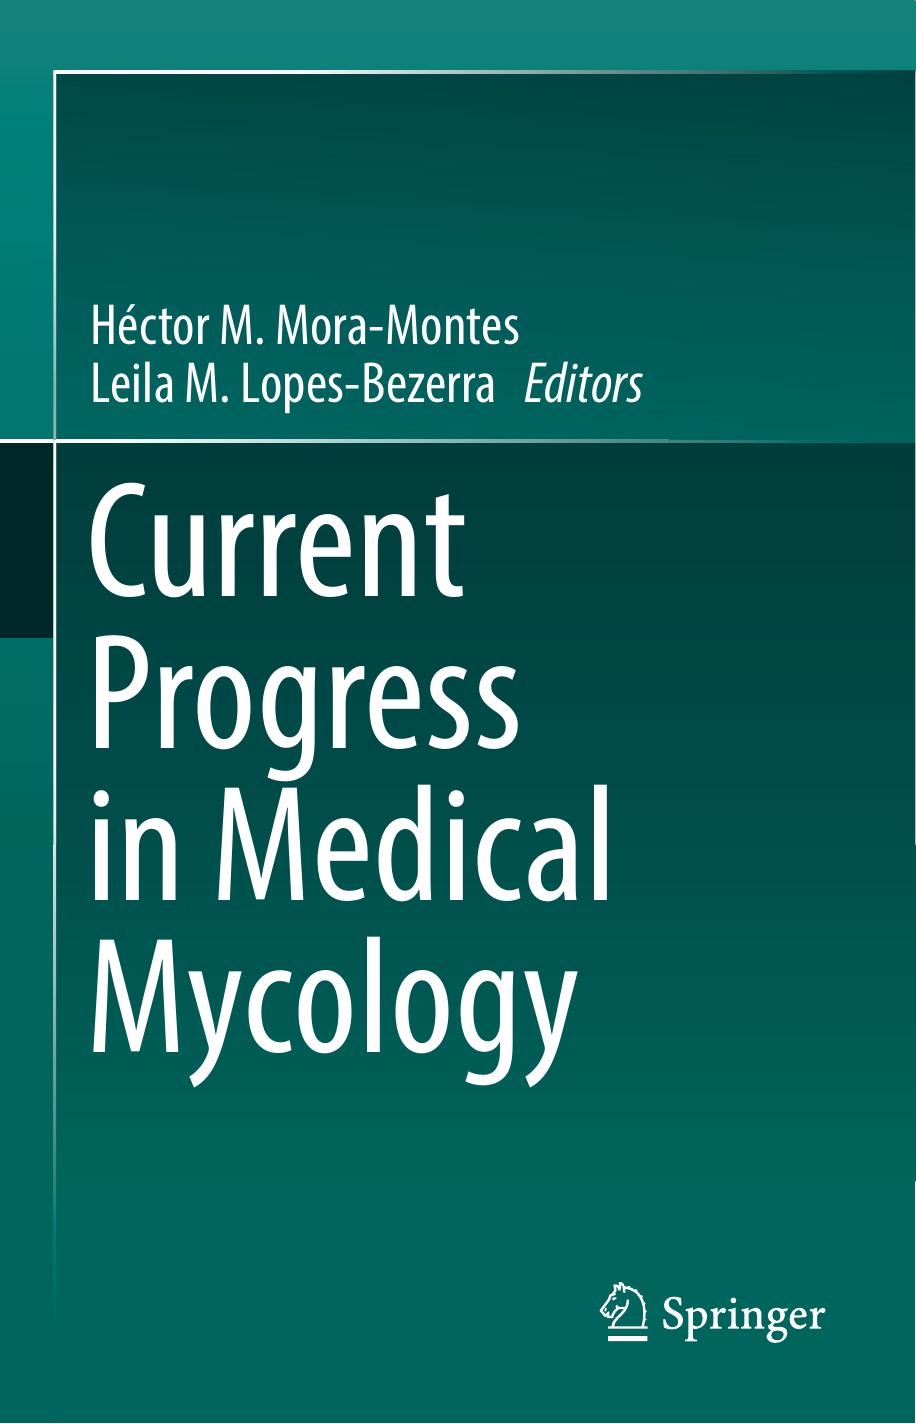 Current Progress in Medical Mycology(2017)